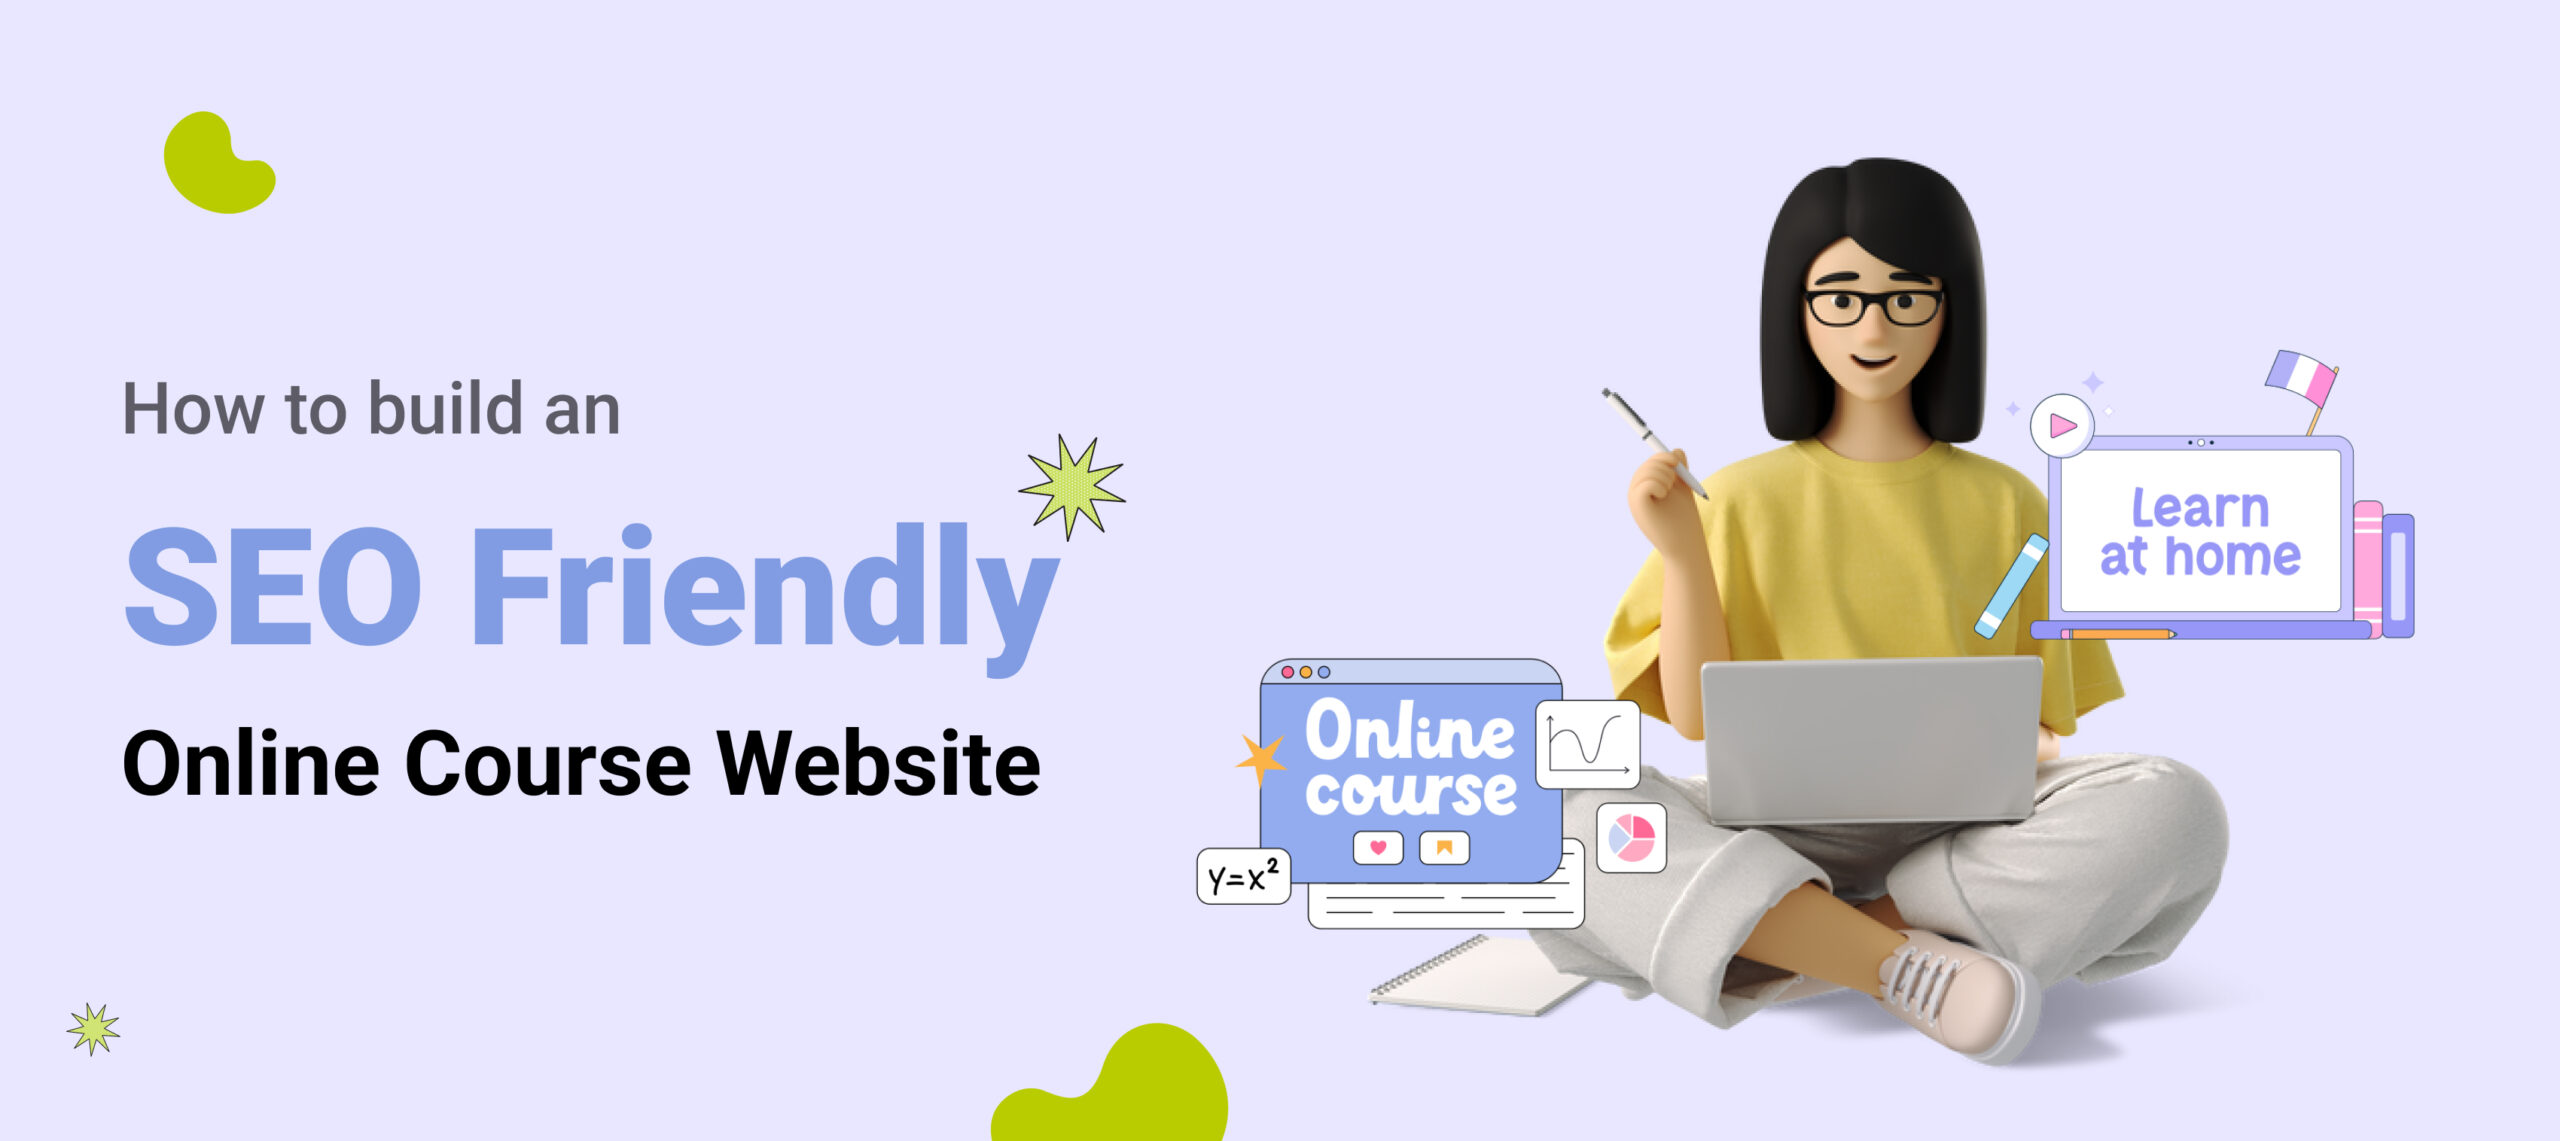  How To Build An SEO-Friendly Online Course Website?